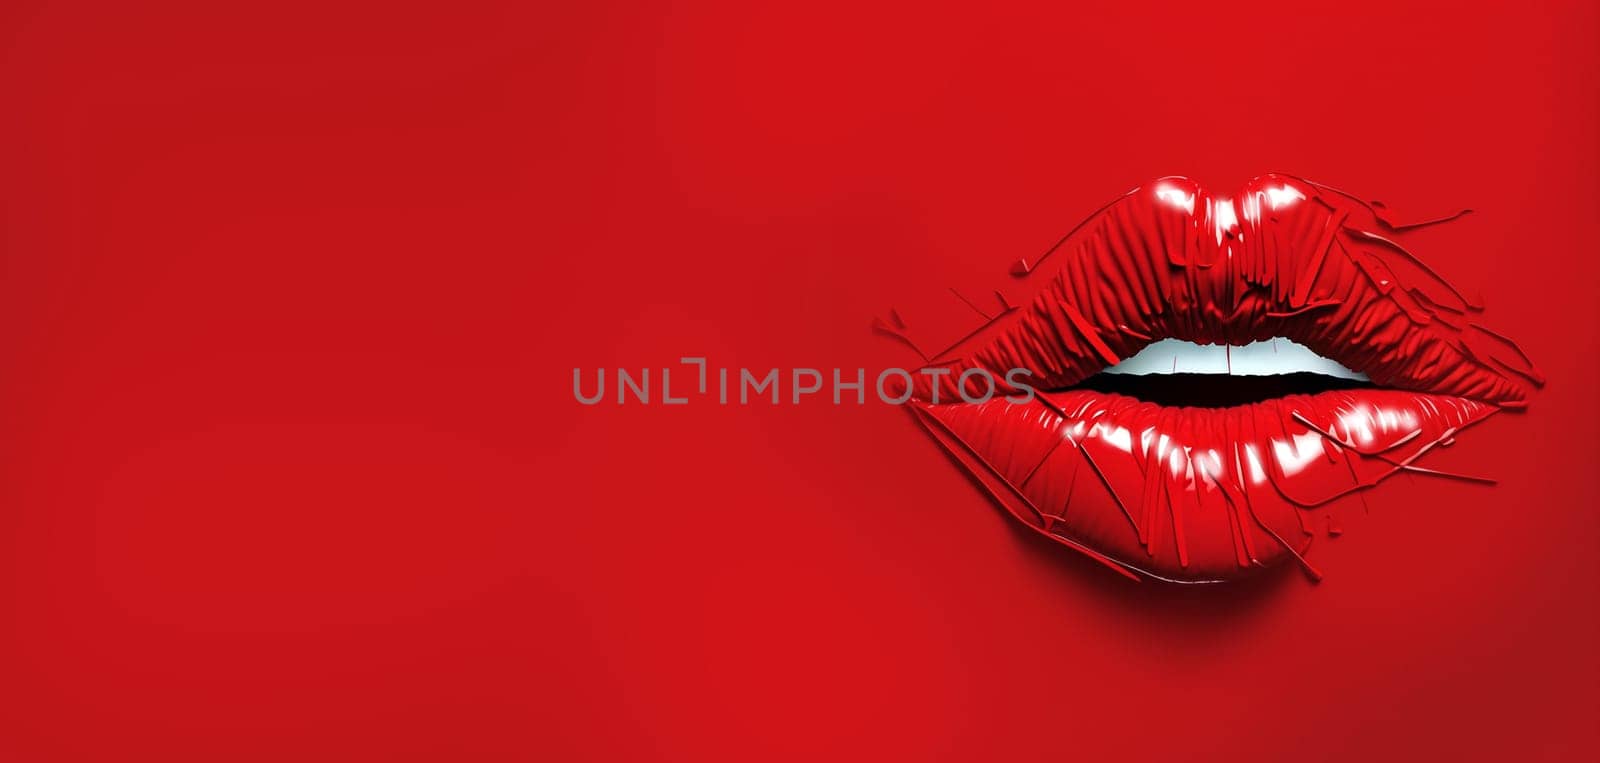 Lips women,kiss,mouth,lip pop art heart background.Valentines mothers day logo.Love,sexy,kiss,wedding card,background,banner.kissing sexy lips isolated icon.illustration.8 March Women's Day